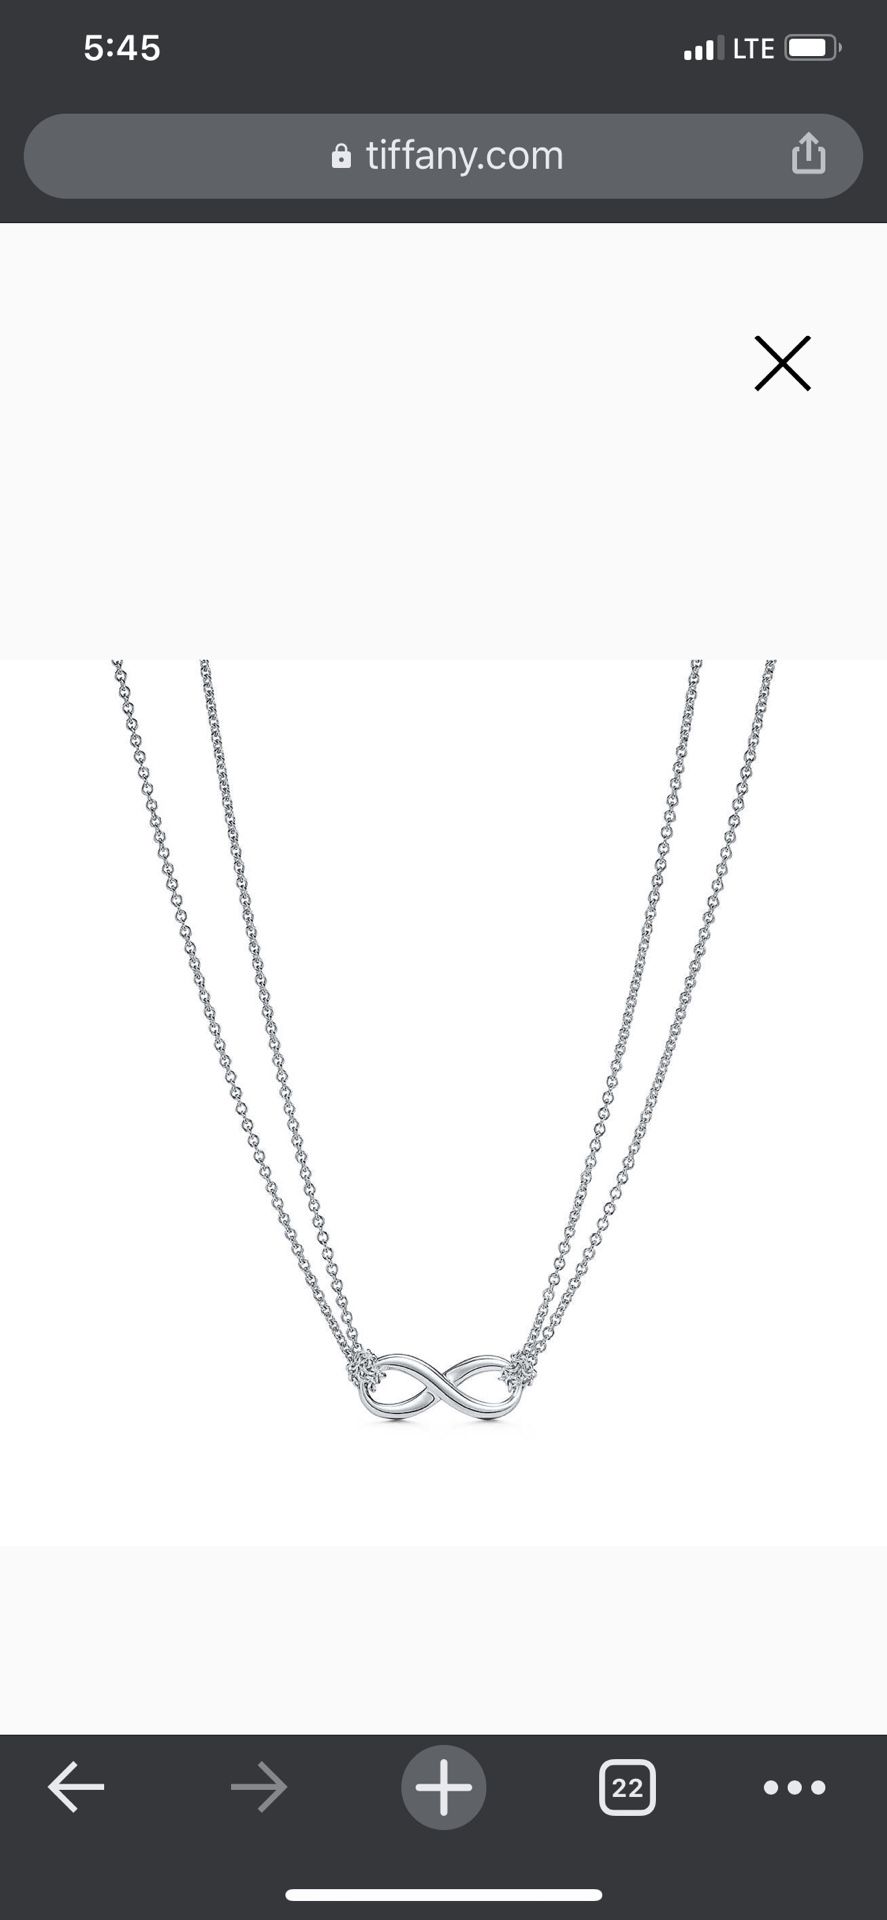 NWOT Tiffany &co infinity dbl necklace $300 retail